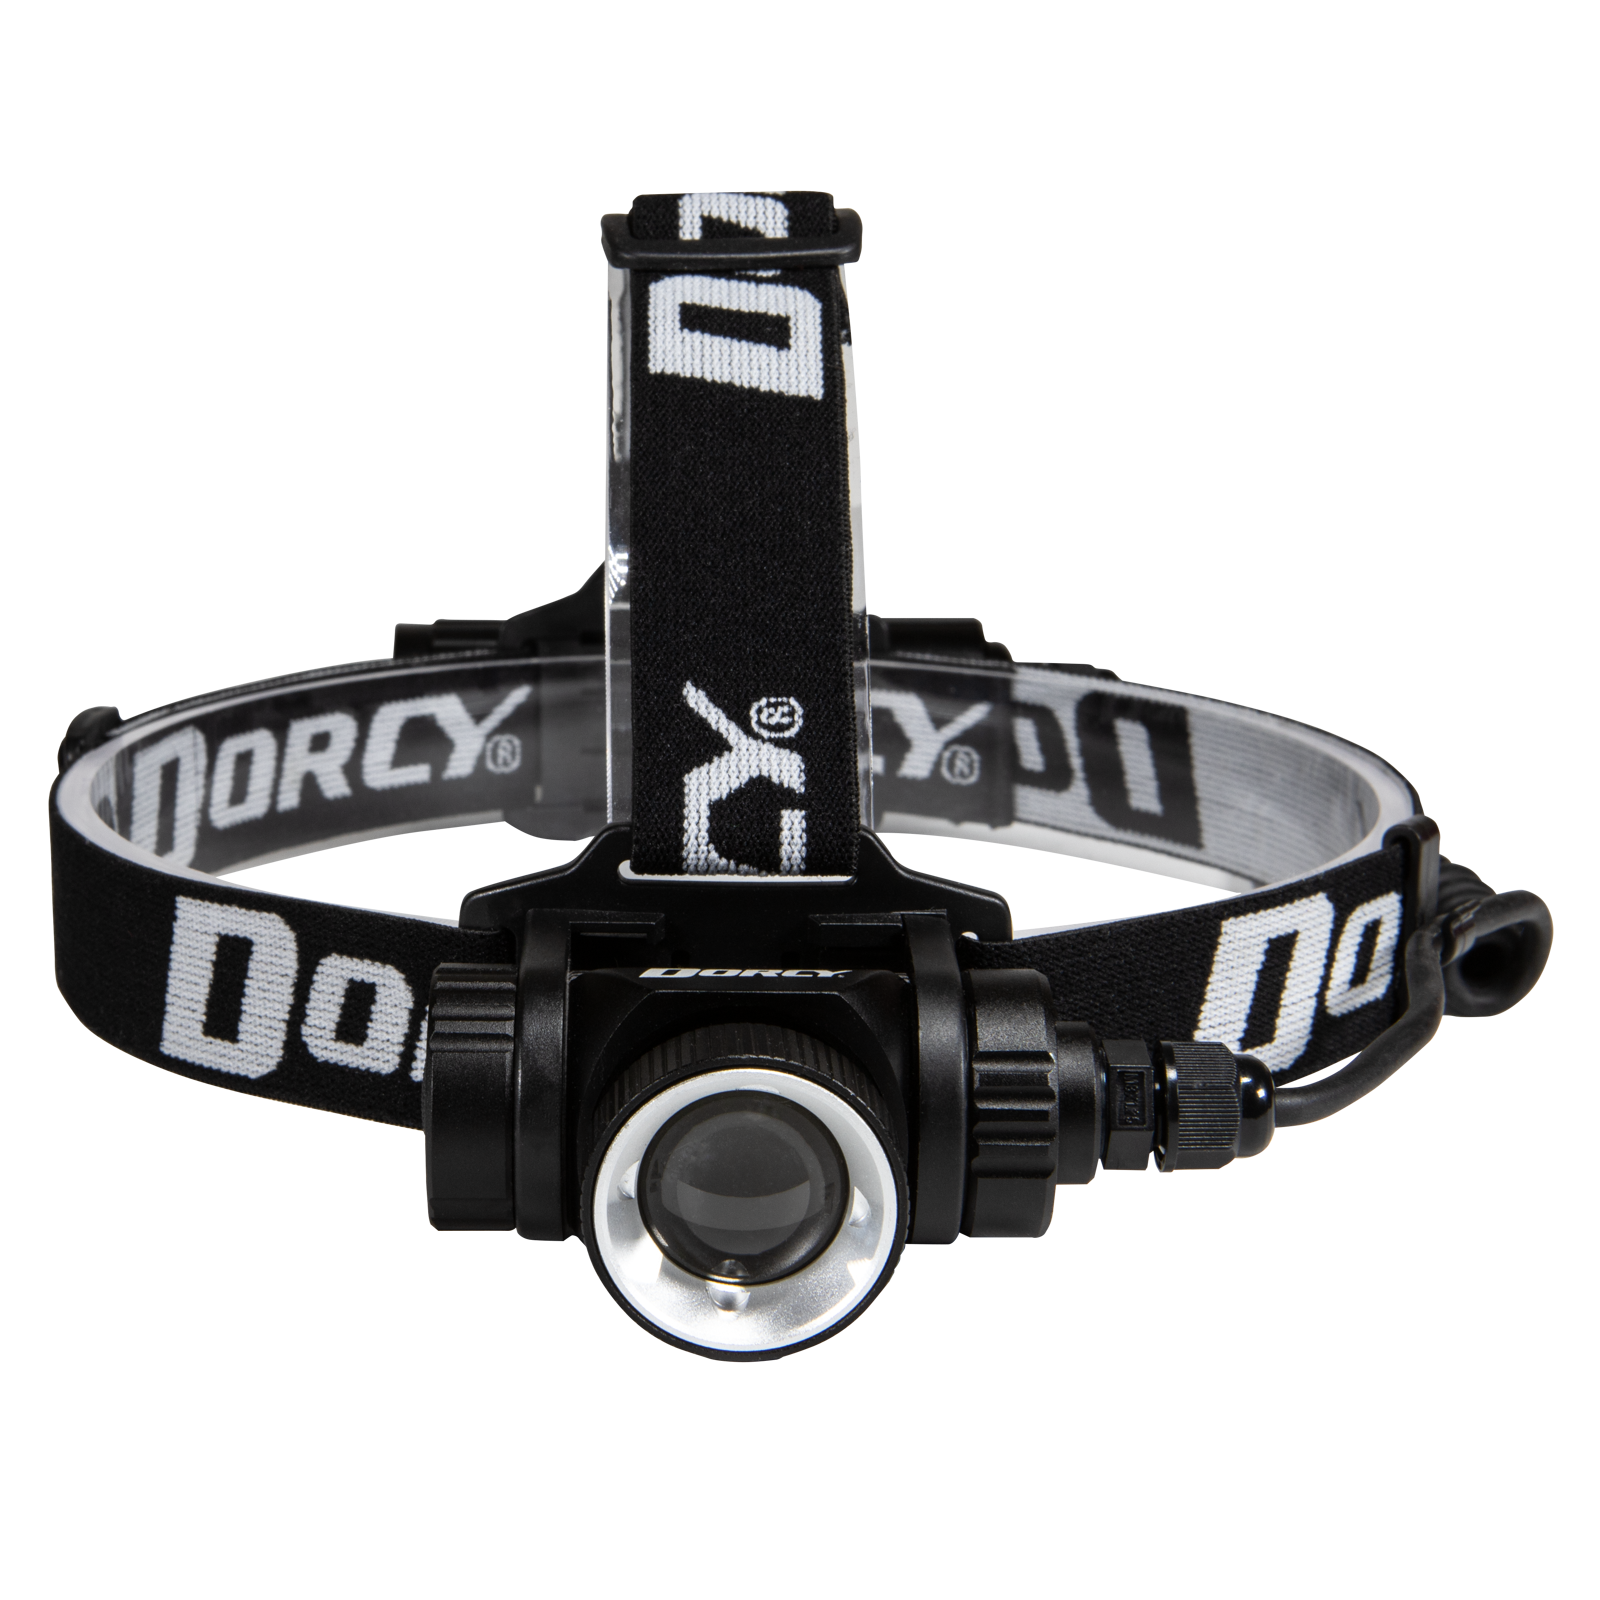 Dorcy 134 Lumens High Power Water/Impact Resistant LED Headlamp 41-2097 